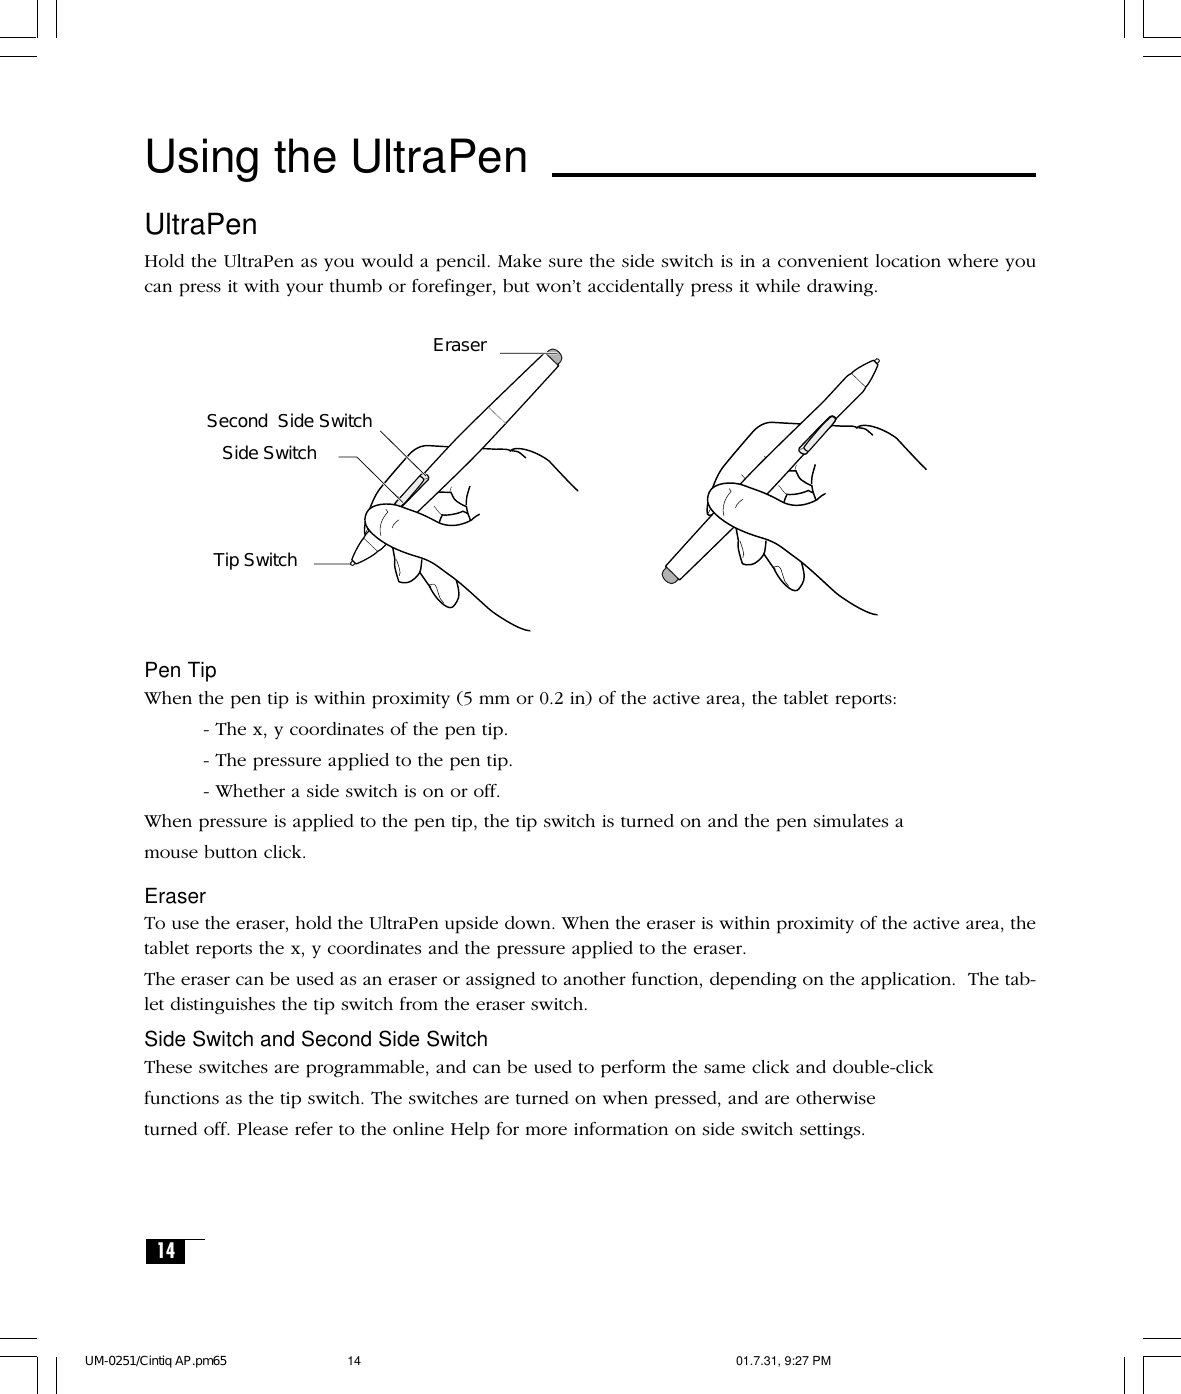 14UltraPenHold the UltraPen as you would a pencil. Make sure the side switch is in a convenient location where youcan press it with your thumb or forefinger, but won’t accidentally press it while drawing.Using the UltraPenPen TipWhen the pen tip is within proximity (5 mm or 0.2 in) of the active area, the tablet reports:- The x, y coordinates of the pen tip.- The pressure applied to the pen tip.- Whether a side switch is on or off.When pressure is applied to the pen tip, the tip switch is turned on and the pen simulates amouse button click.EraserTo use the eraser, hold the UltraPen upside down. When the eraser is within proximity of the active area, thetablet reports the x, y coordinates and the pressure applied to the eraser.The eraser can be used as an eraser or assigned to another function, depending on the application.  The tab-let distinguishes the tip switch from the eraser switch.Side Switch and Second Side SwitchThese switches are programmable, and can be used to perform the same click and double-clickfunctions as the tip switch. The switches are turned on when pressed, and are otherwiseturned off. Please refer to the online Help for more information on side switch settings.Tip SwitchEraserSide SwitchSecond  Side SwitchUM-0251/Cintiq AP.pm65 01.7.31, 9:27 PM14